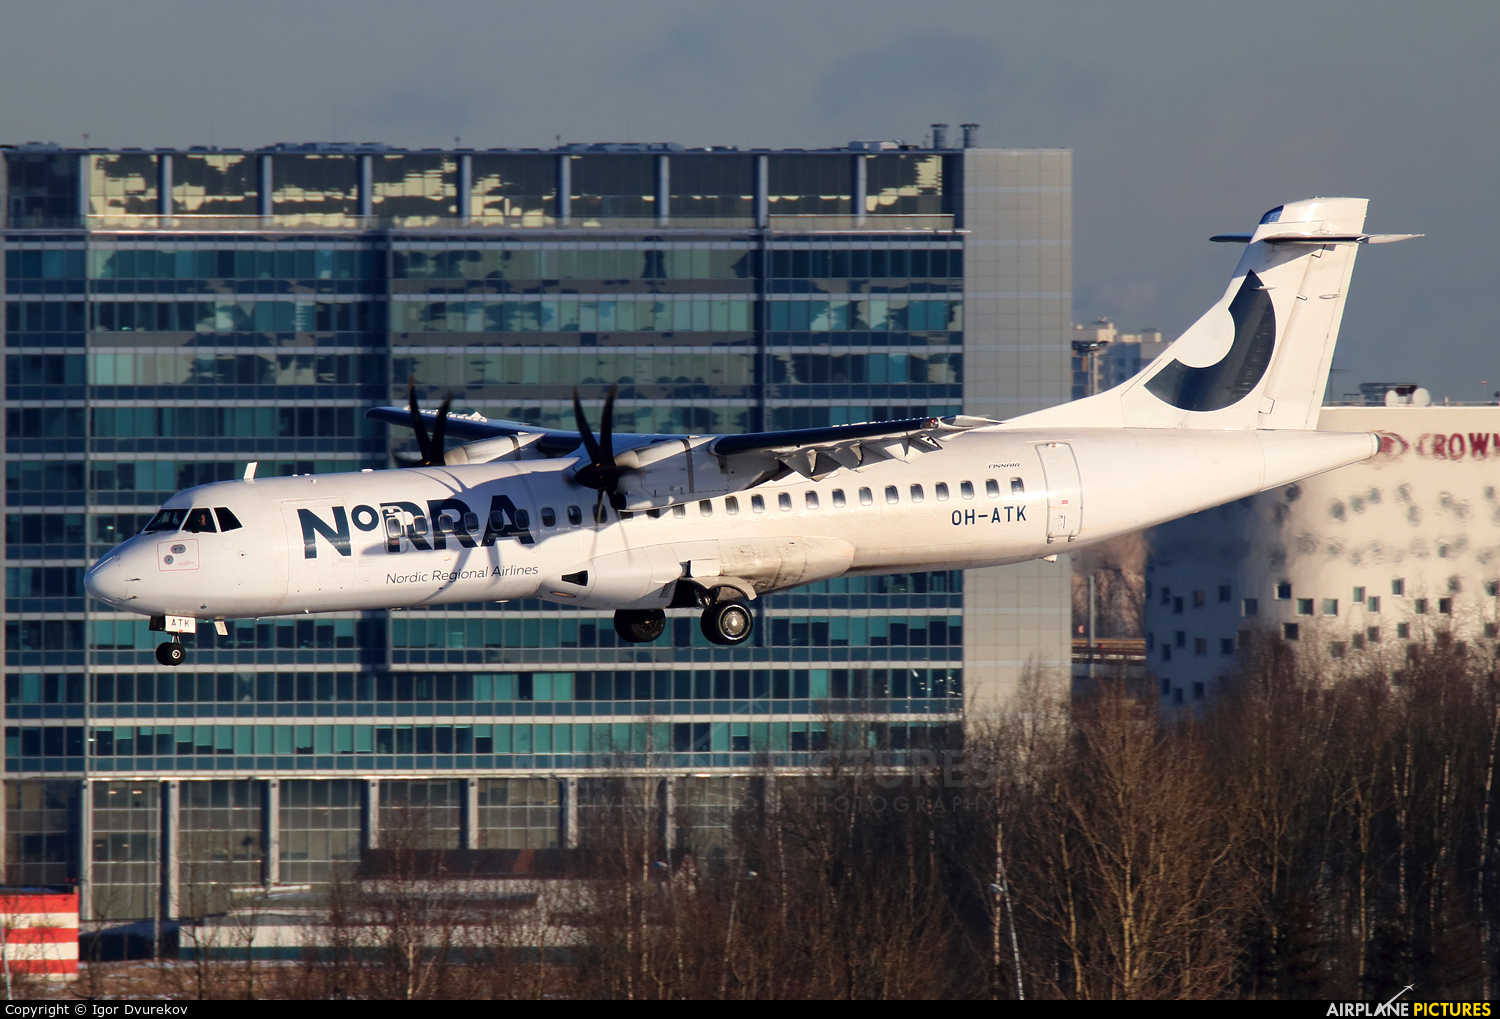 NoRRA - Nordic Regional Airlines OH-ATK aircraft at St. Petersburg - Pulkovo